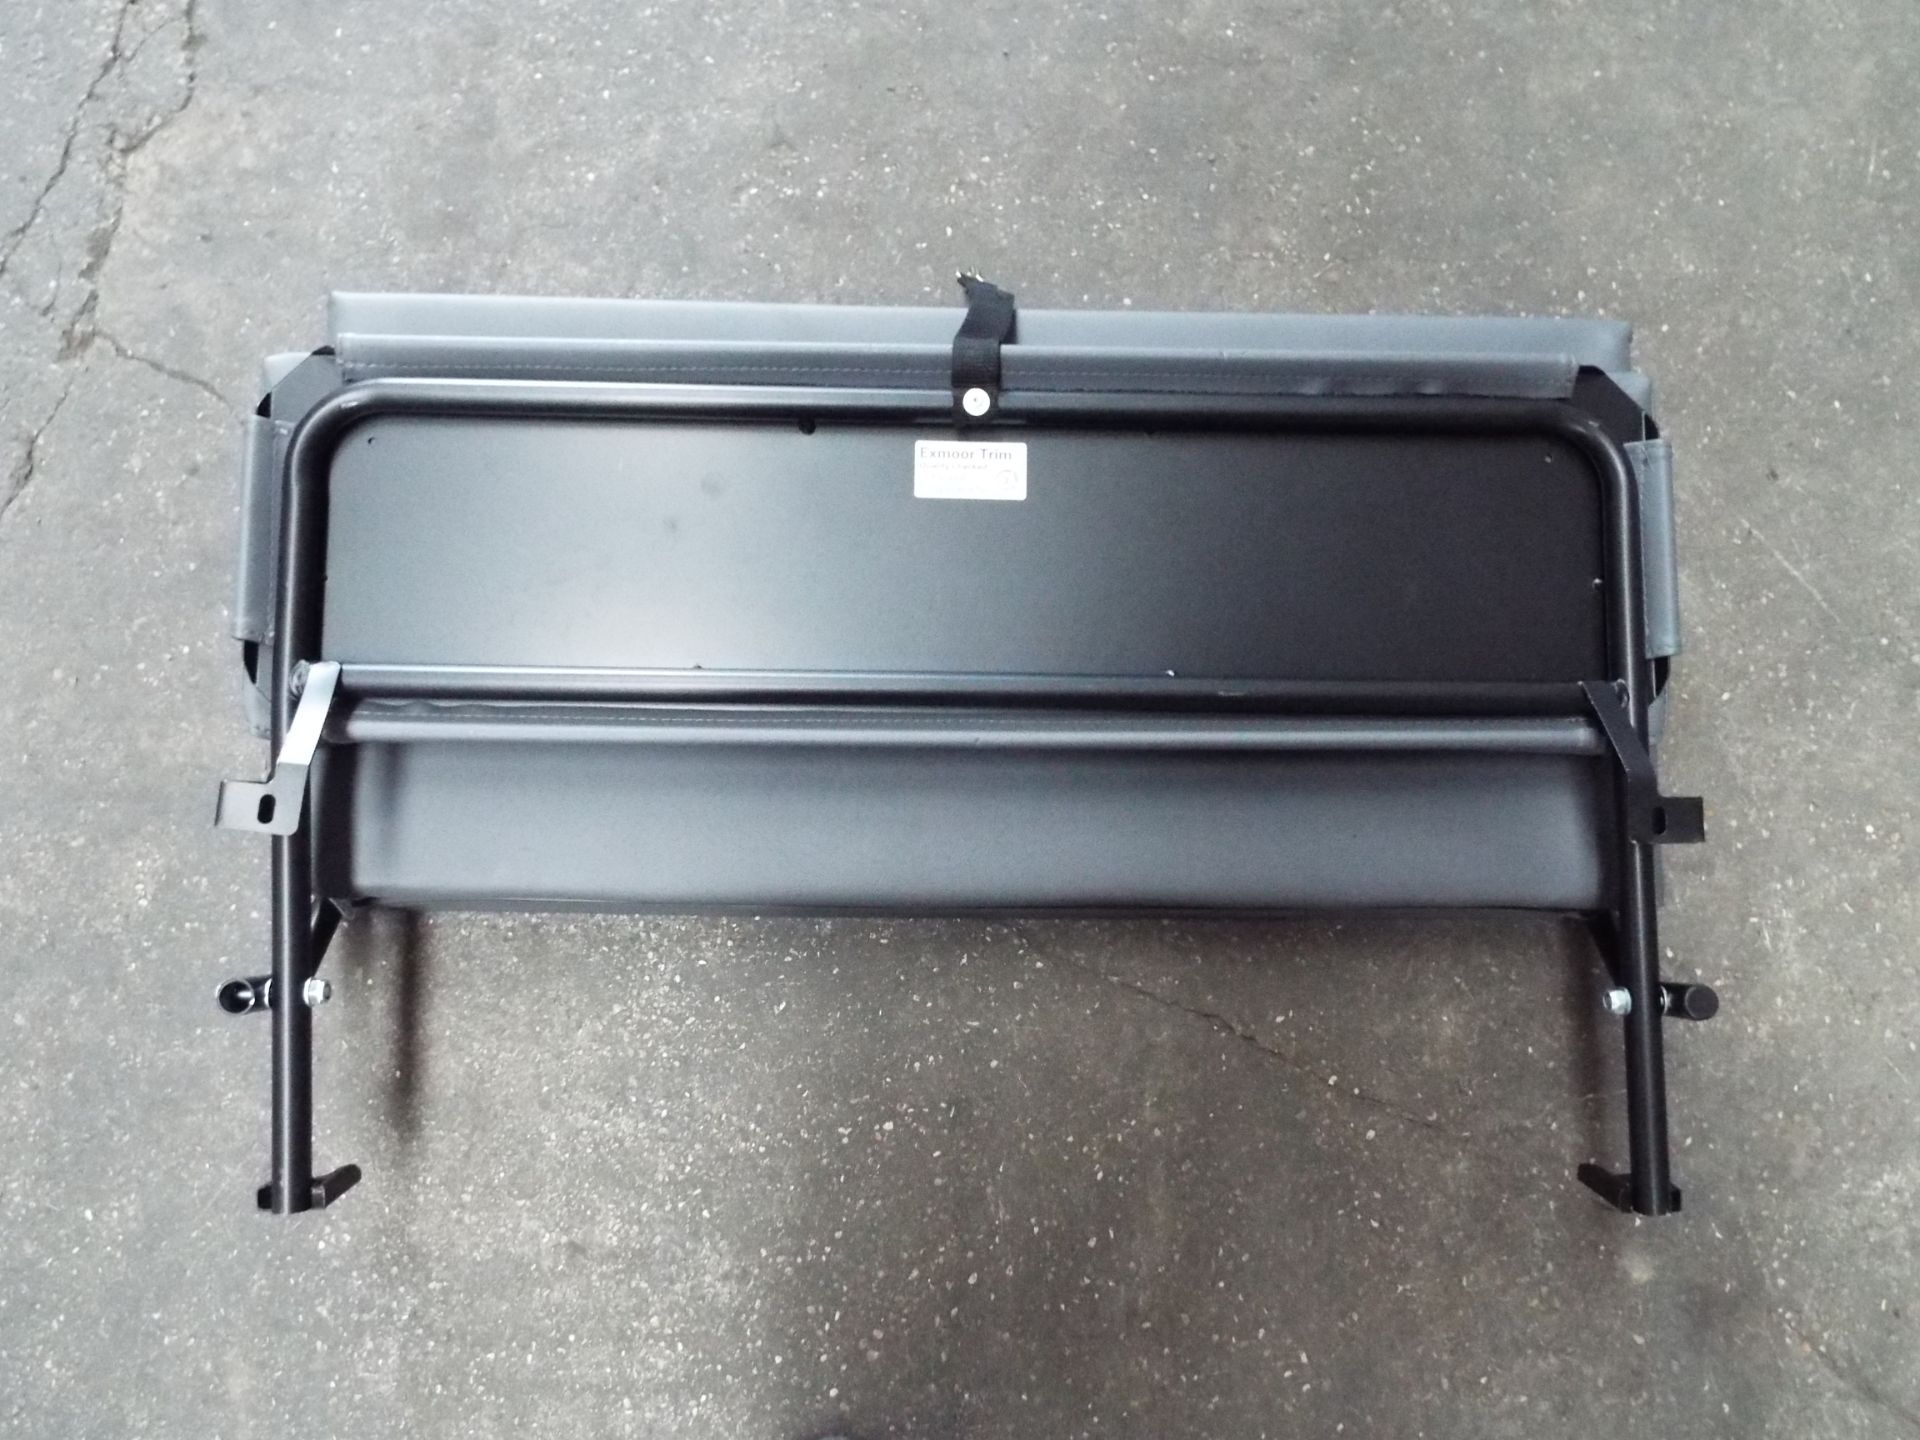 2 x Land Rover Defender Rear Bench Seats - Image 7 of 8